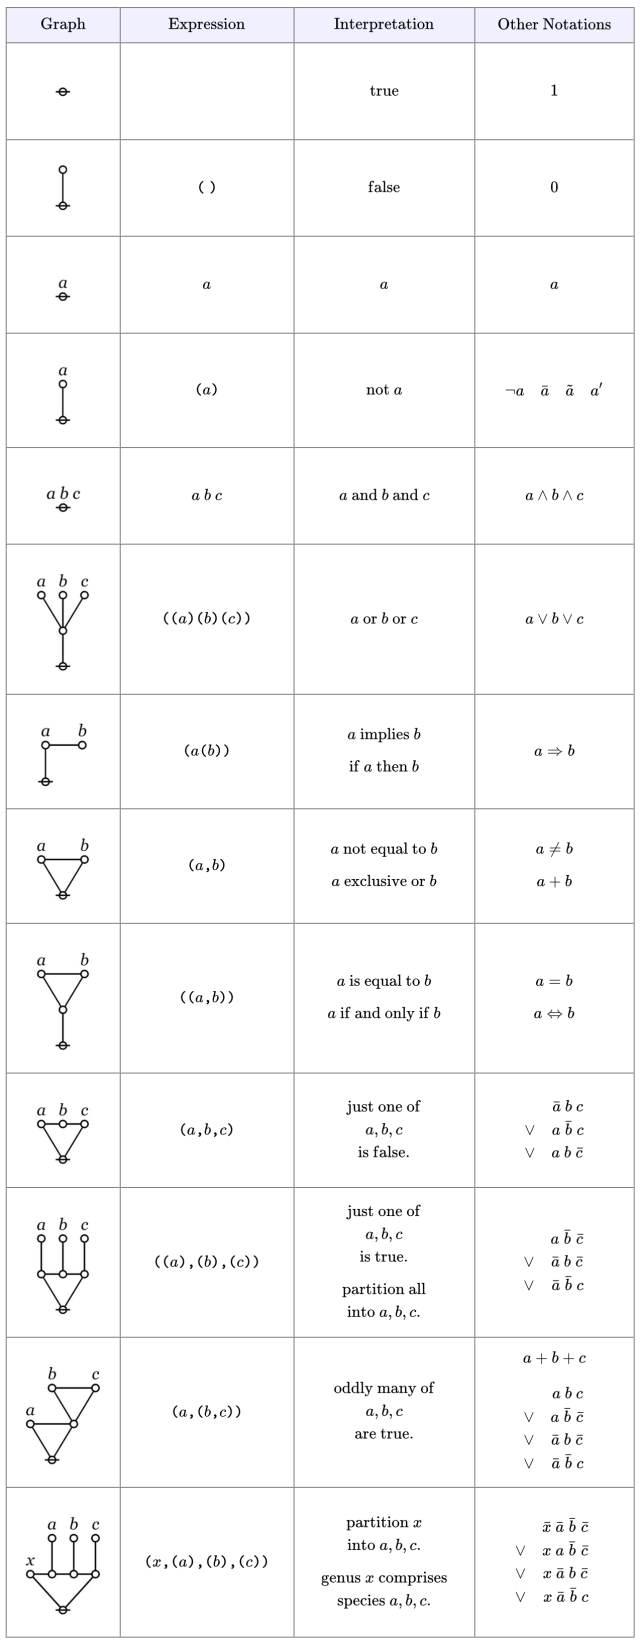 Table 1.  Syntax and Semantics of a Calculus for Propositional Logic